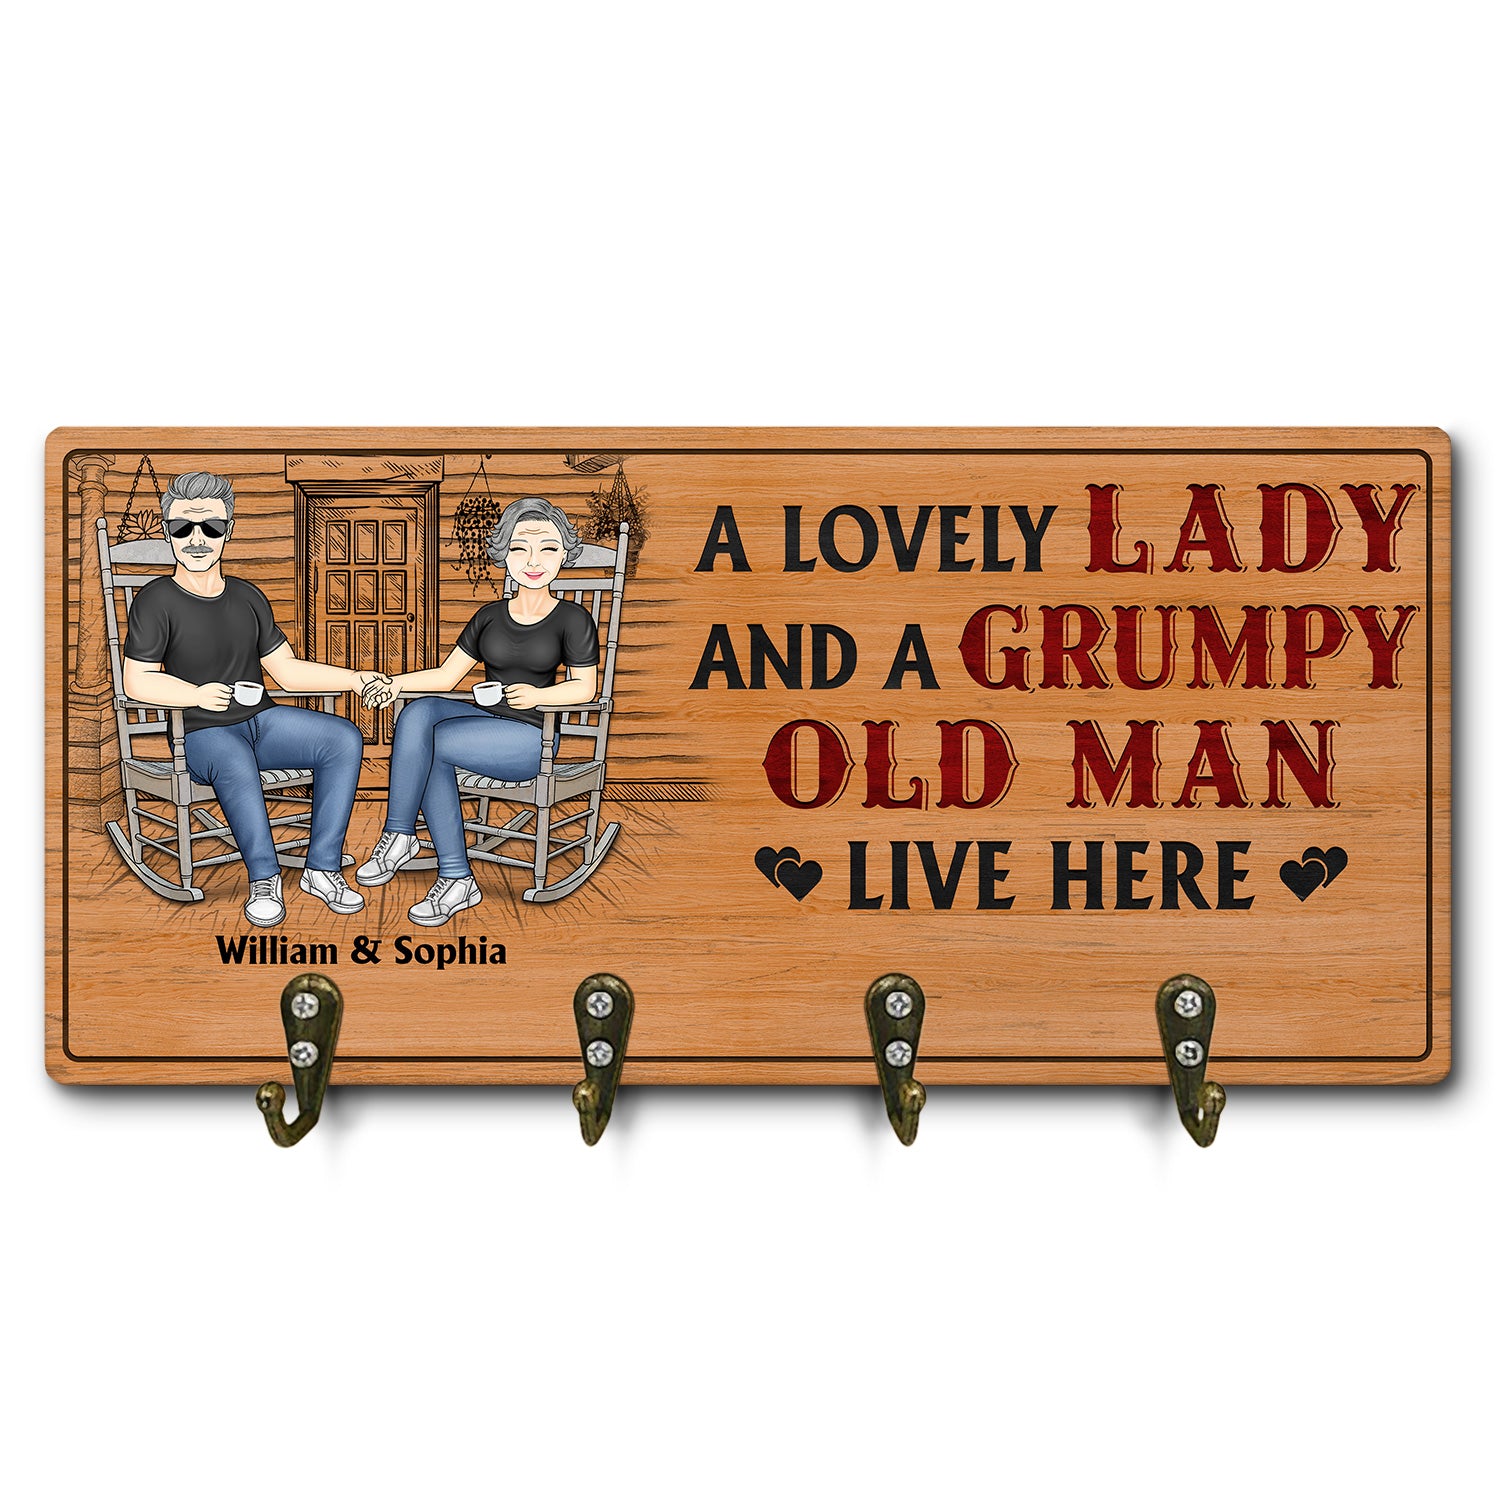 A Lovely Lady And A Grumpy Old Man Live Here - Anniversary, Birthday, Home Decor Gift For Spouse, Lover, Husband, Wife, Boyfriend, Girlfriend, Couple - Personalized Custom Wood Key Holder